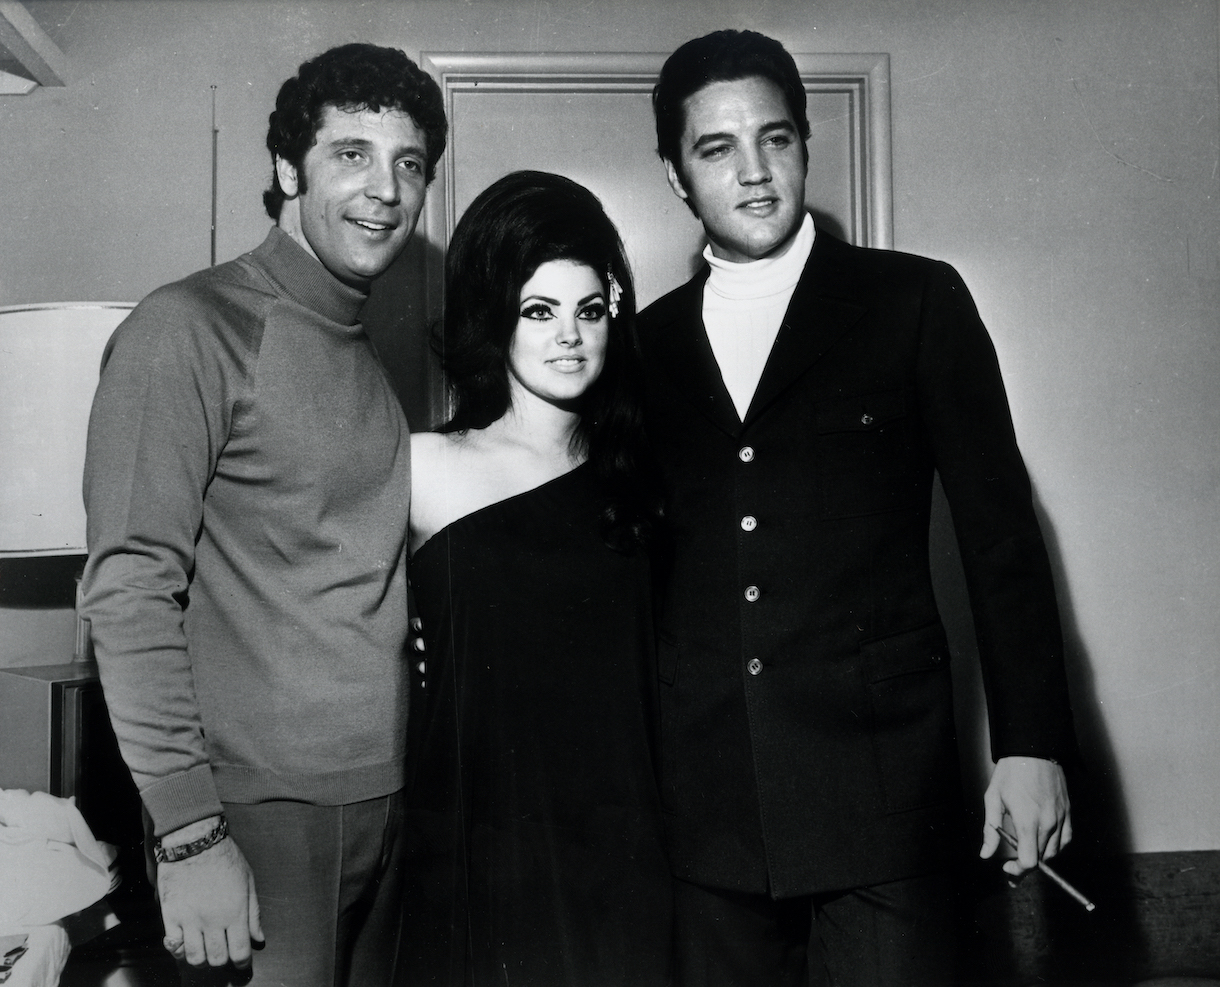 Priscilla Presley Said It Was Extremely Hard To Relax Around Elvis Presley’s Constant Scrutiny